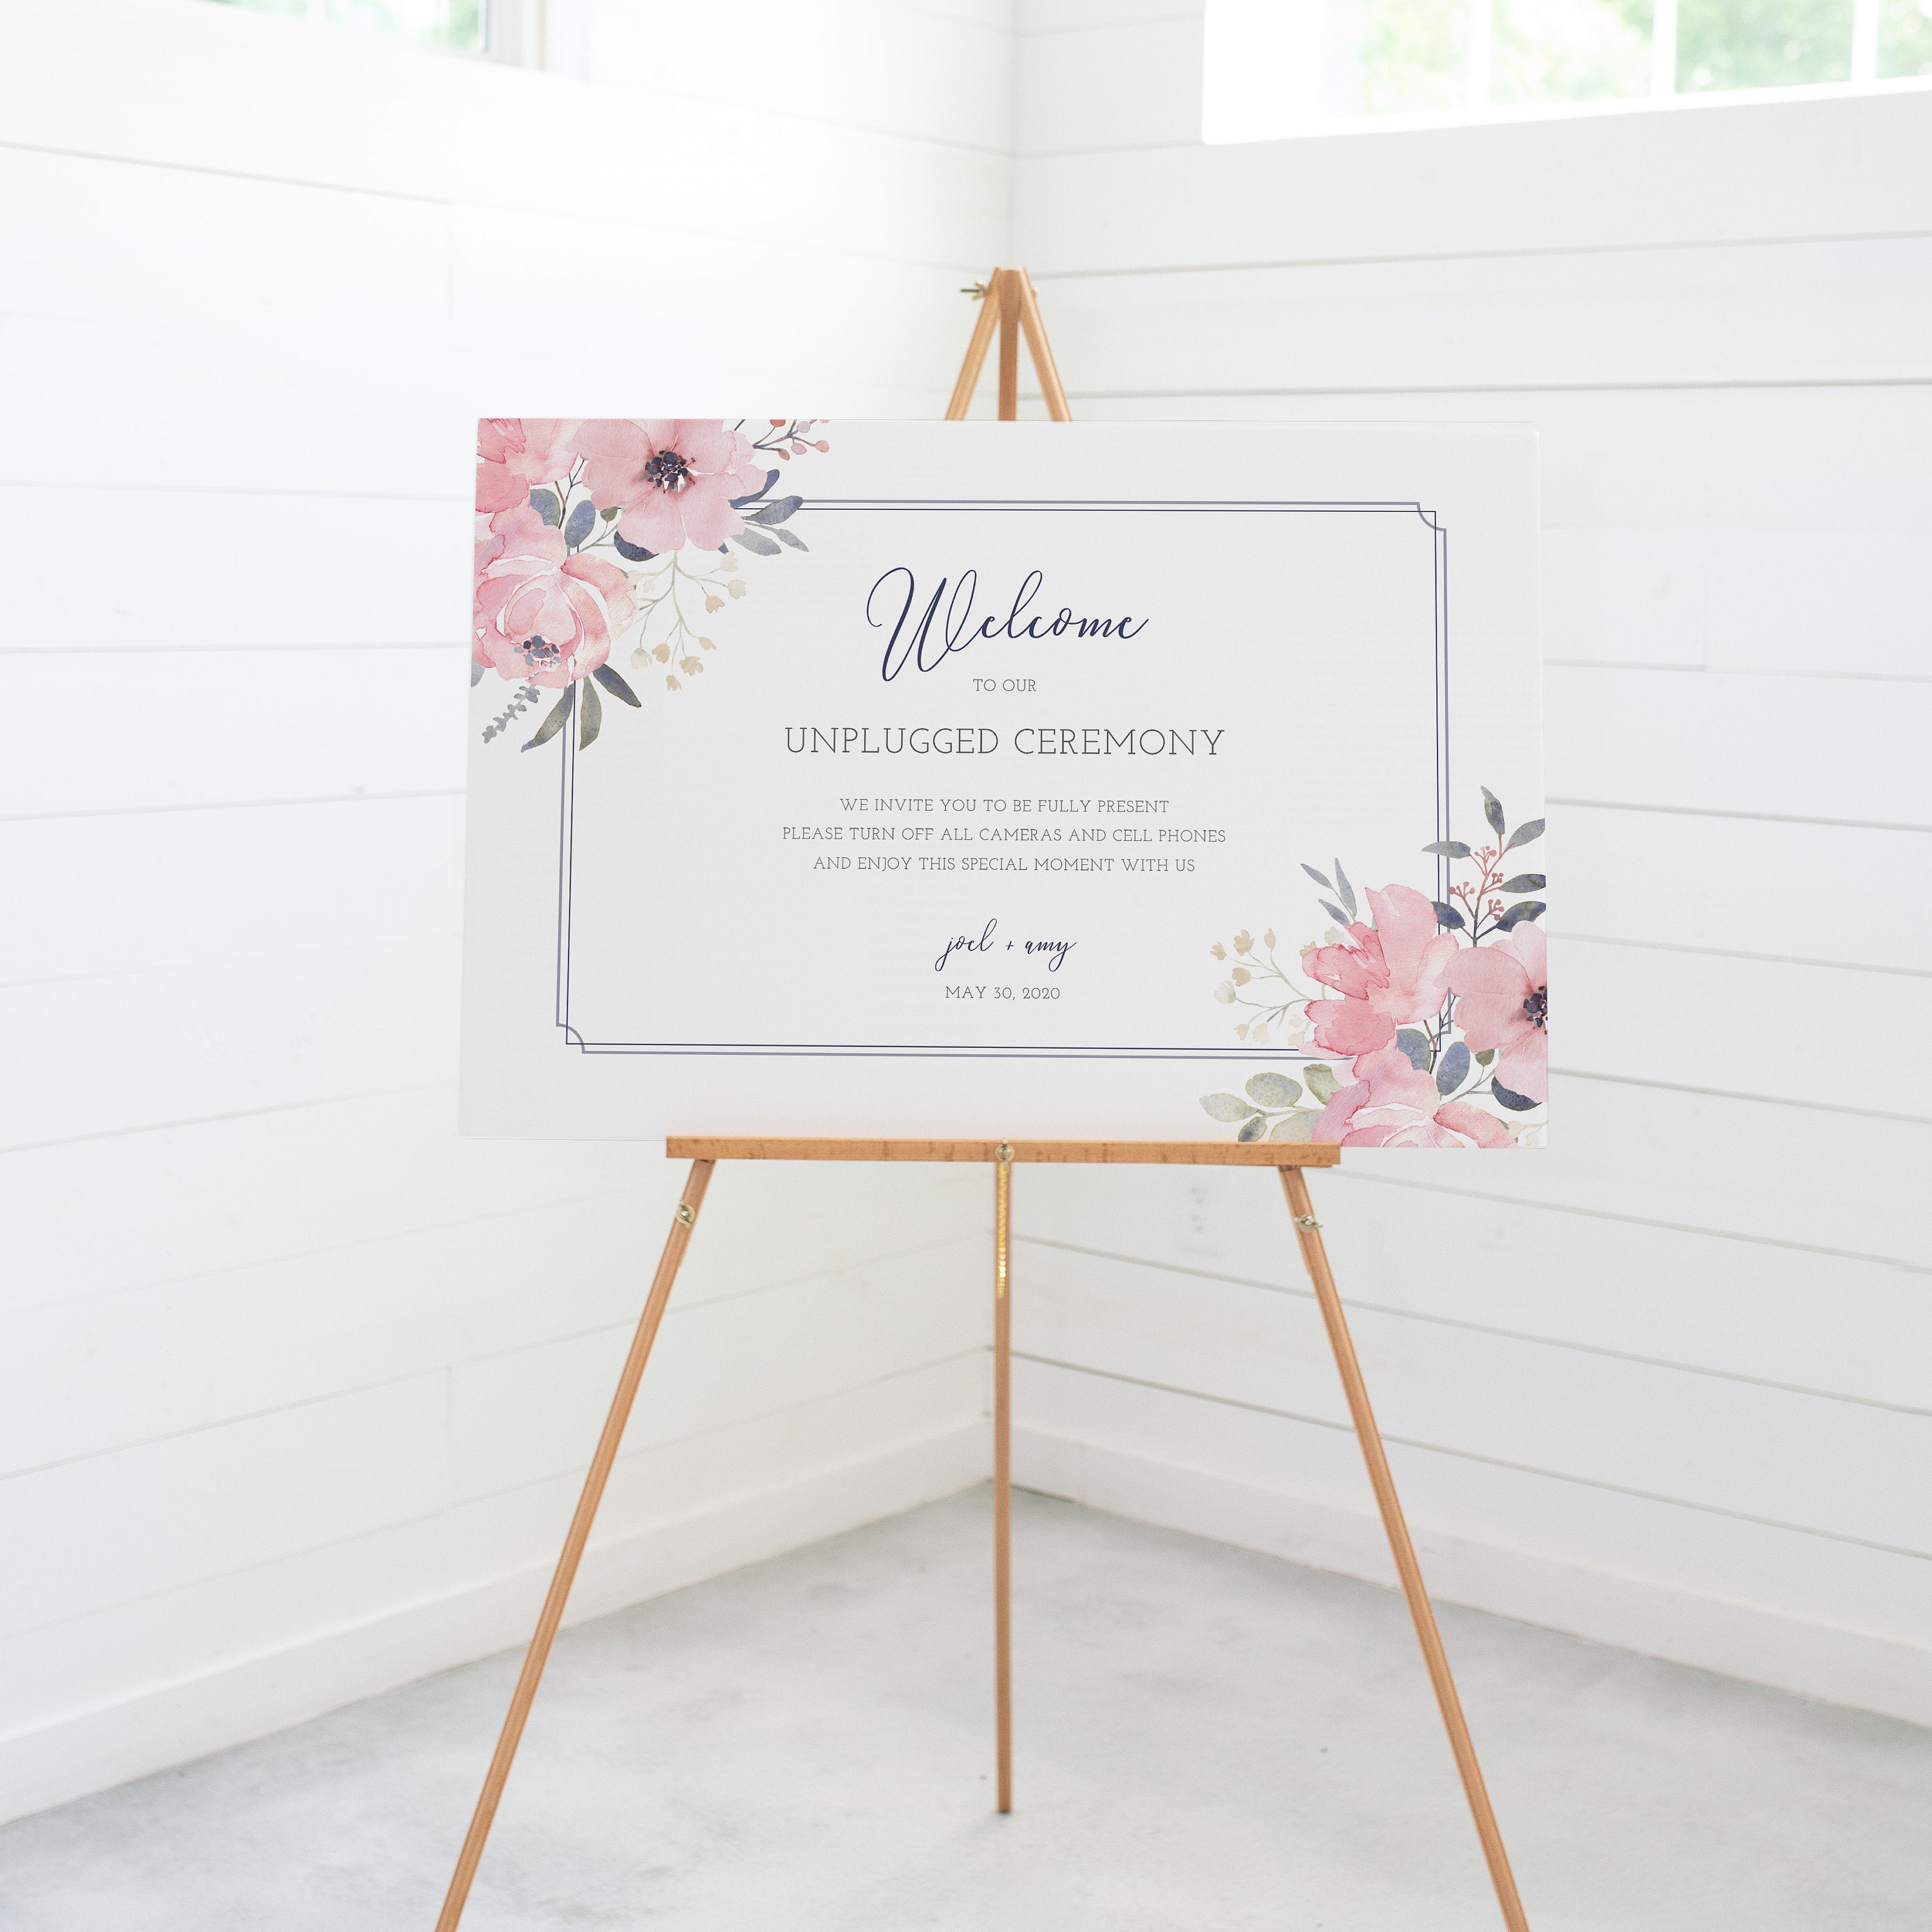 Navy and Blush Wedding Welcome Sign Printable, Unplugged Wedding Sign Template, Wedding Unplugged Ceremony Sign, DIGITAL DOWNLOAD - NB100 - @PlumPolkaDot 